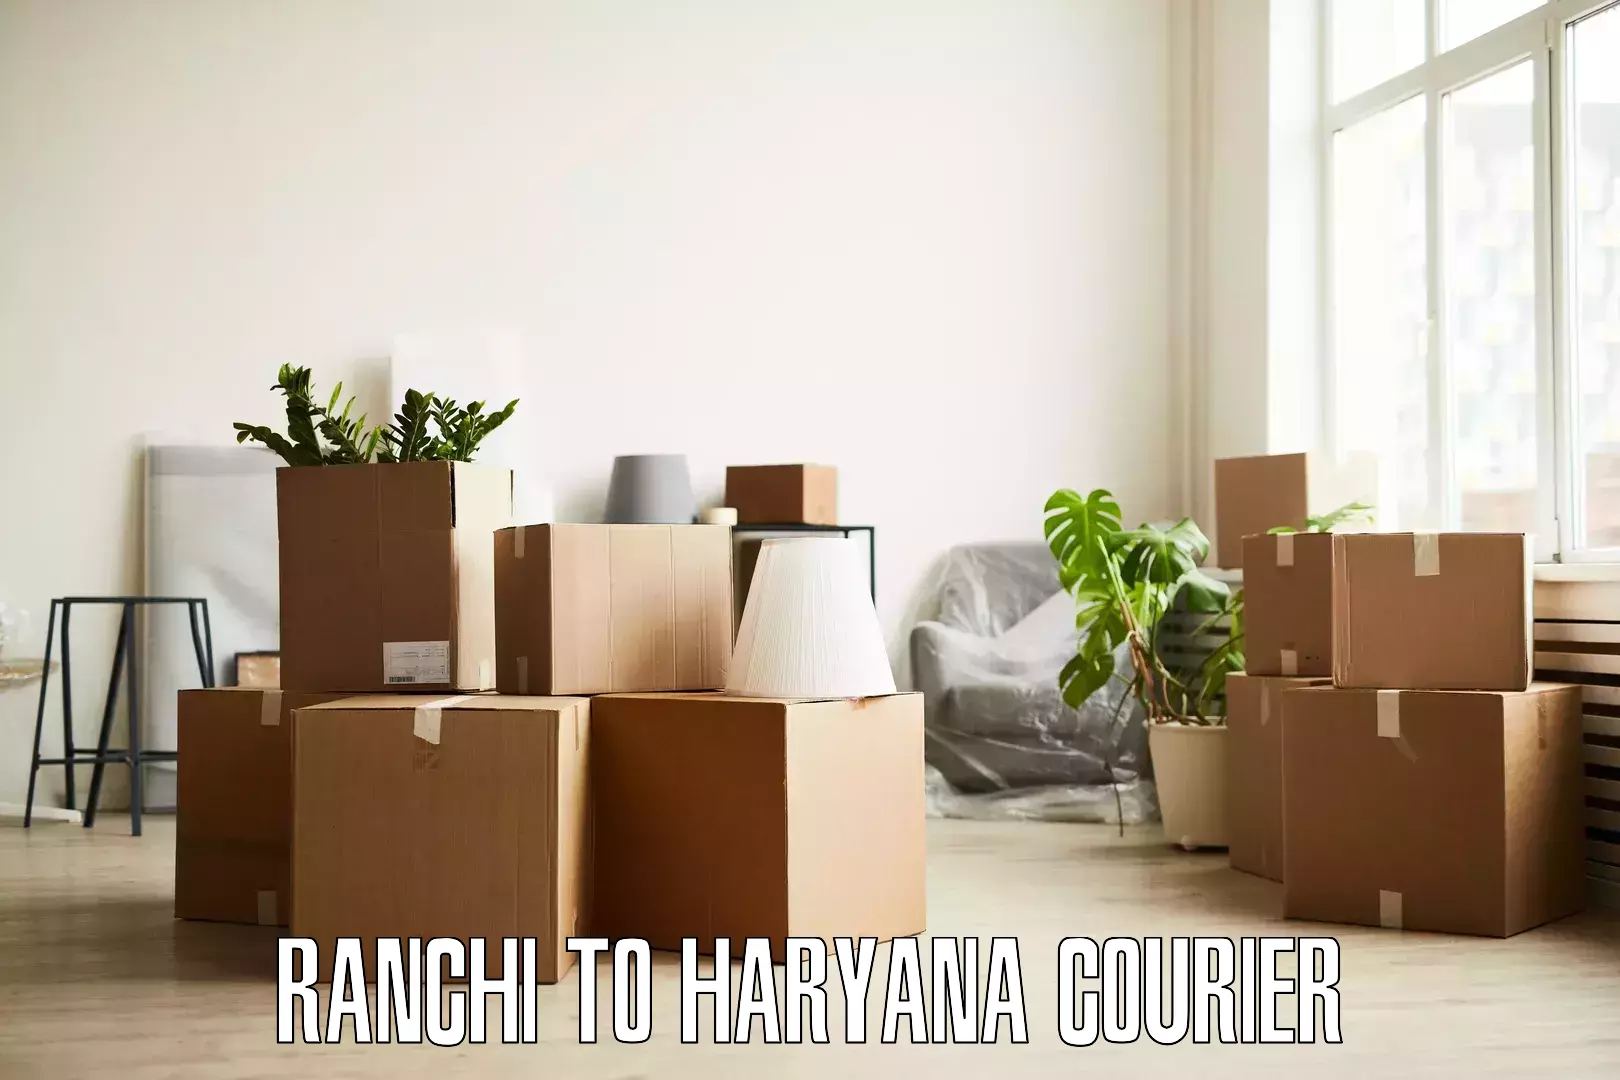 Home goods moving company Ranchi to Ellenabad